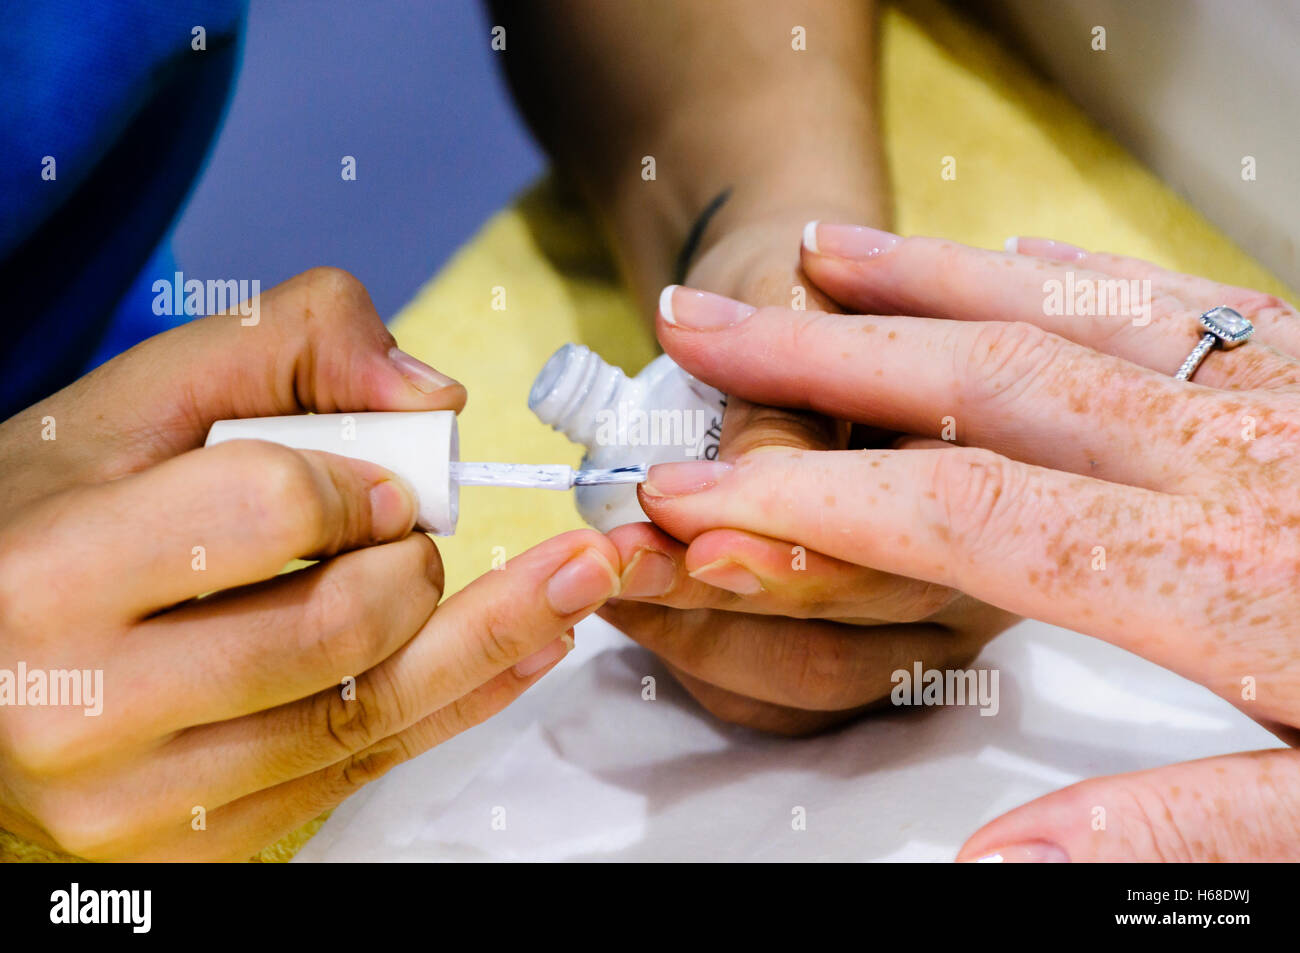 A woman has a French Manicure nail varnish treatment at a beauty salon. Stock Photo